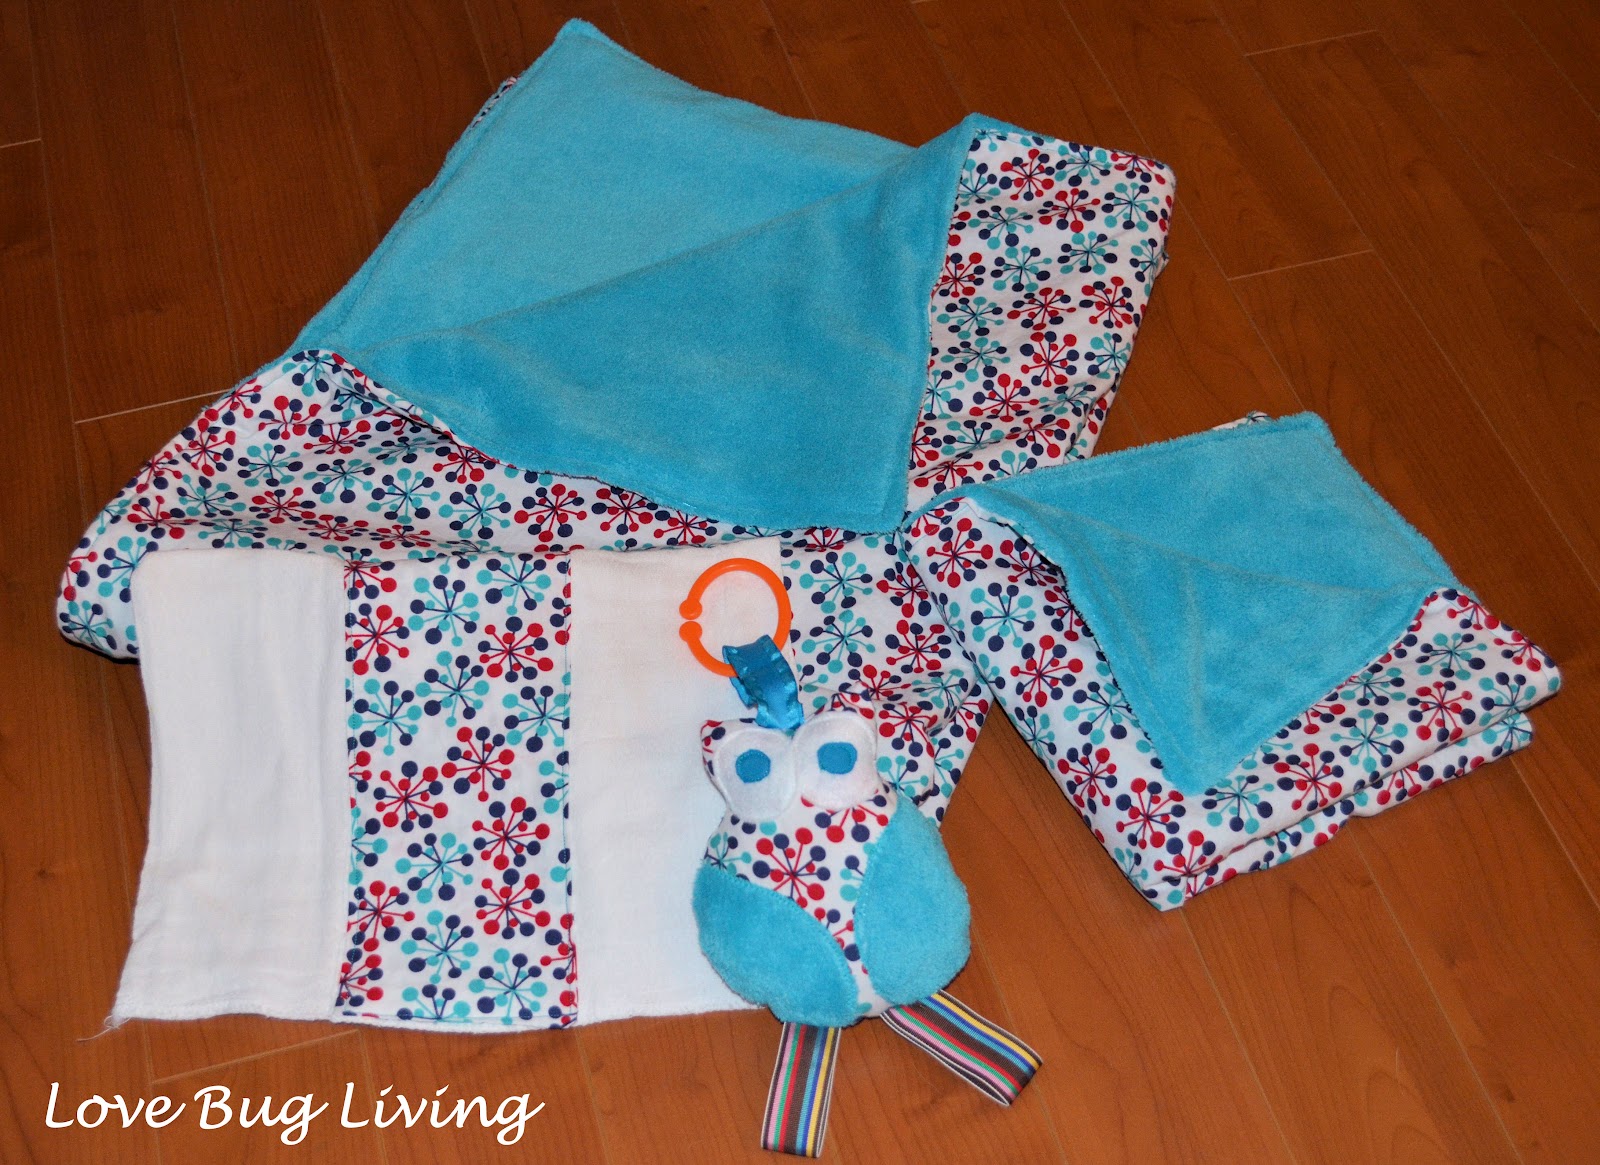 Love Bug Living: Baby Shower Gifts